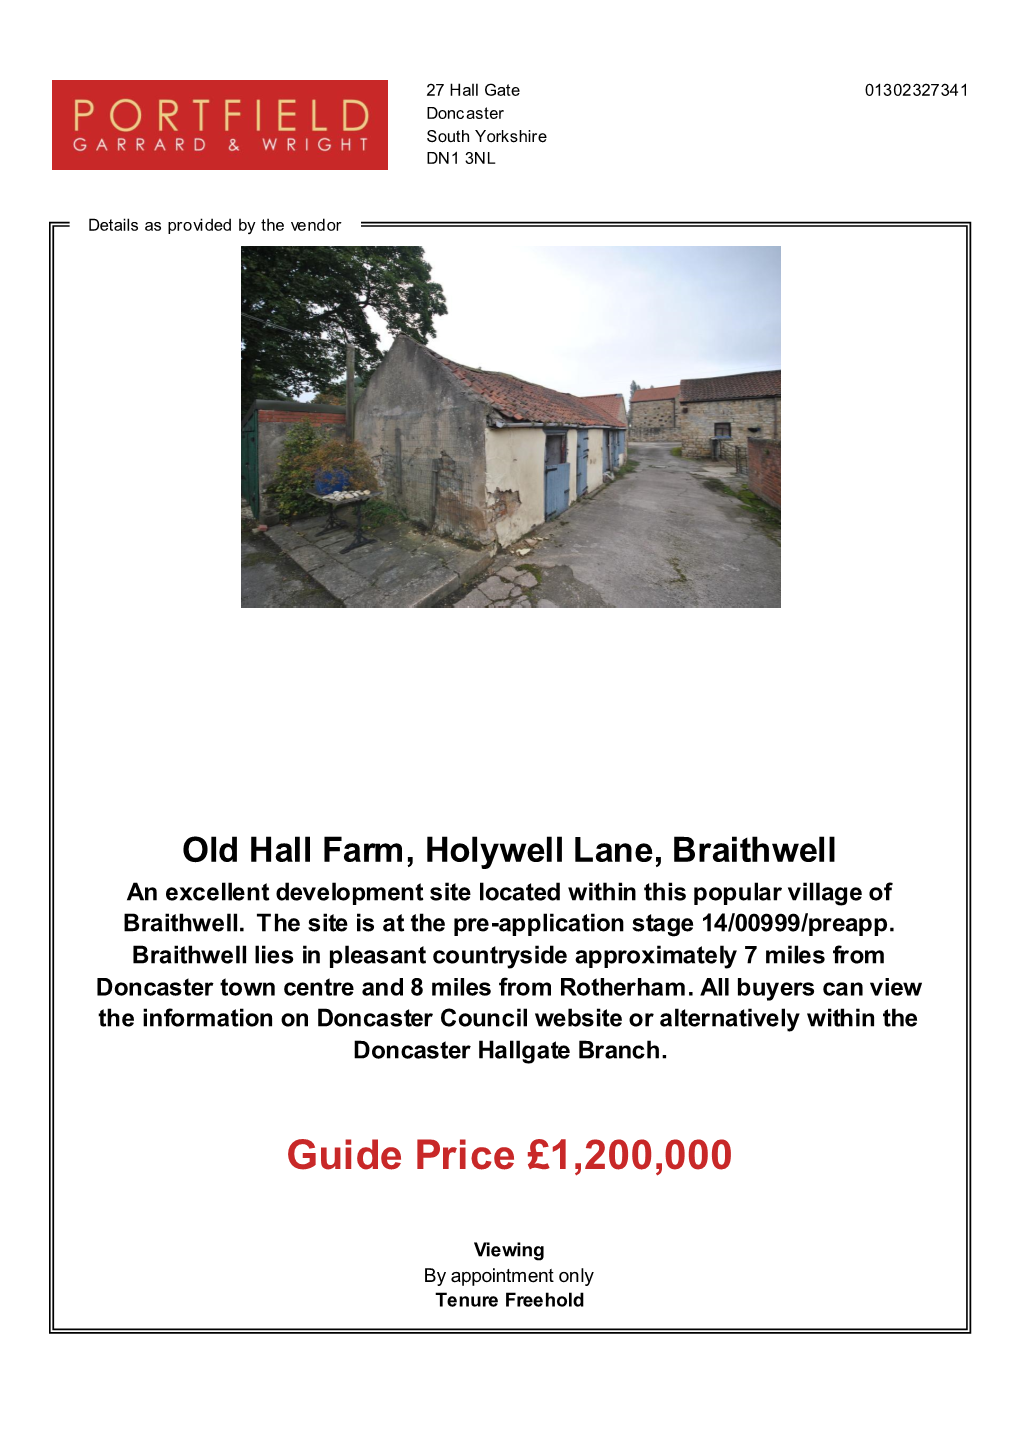 Old Hall Farm, Holywell Lane, Braithwell an Excellent Development Site Located Within This Popular Village of Braithwell